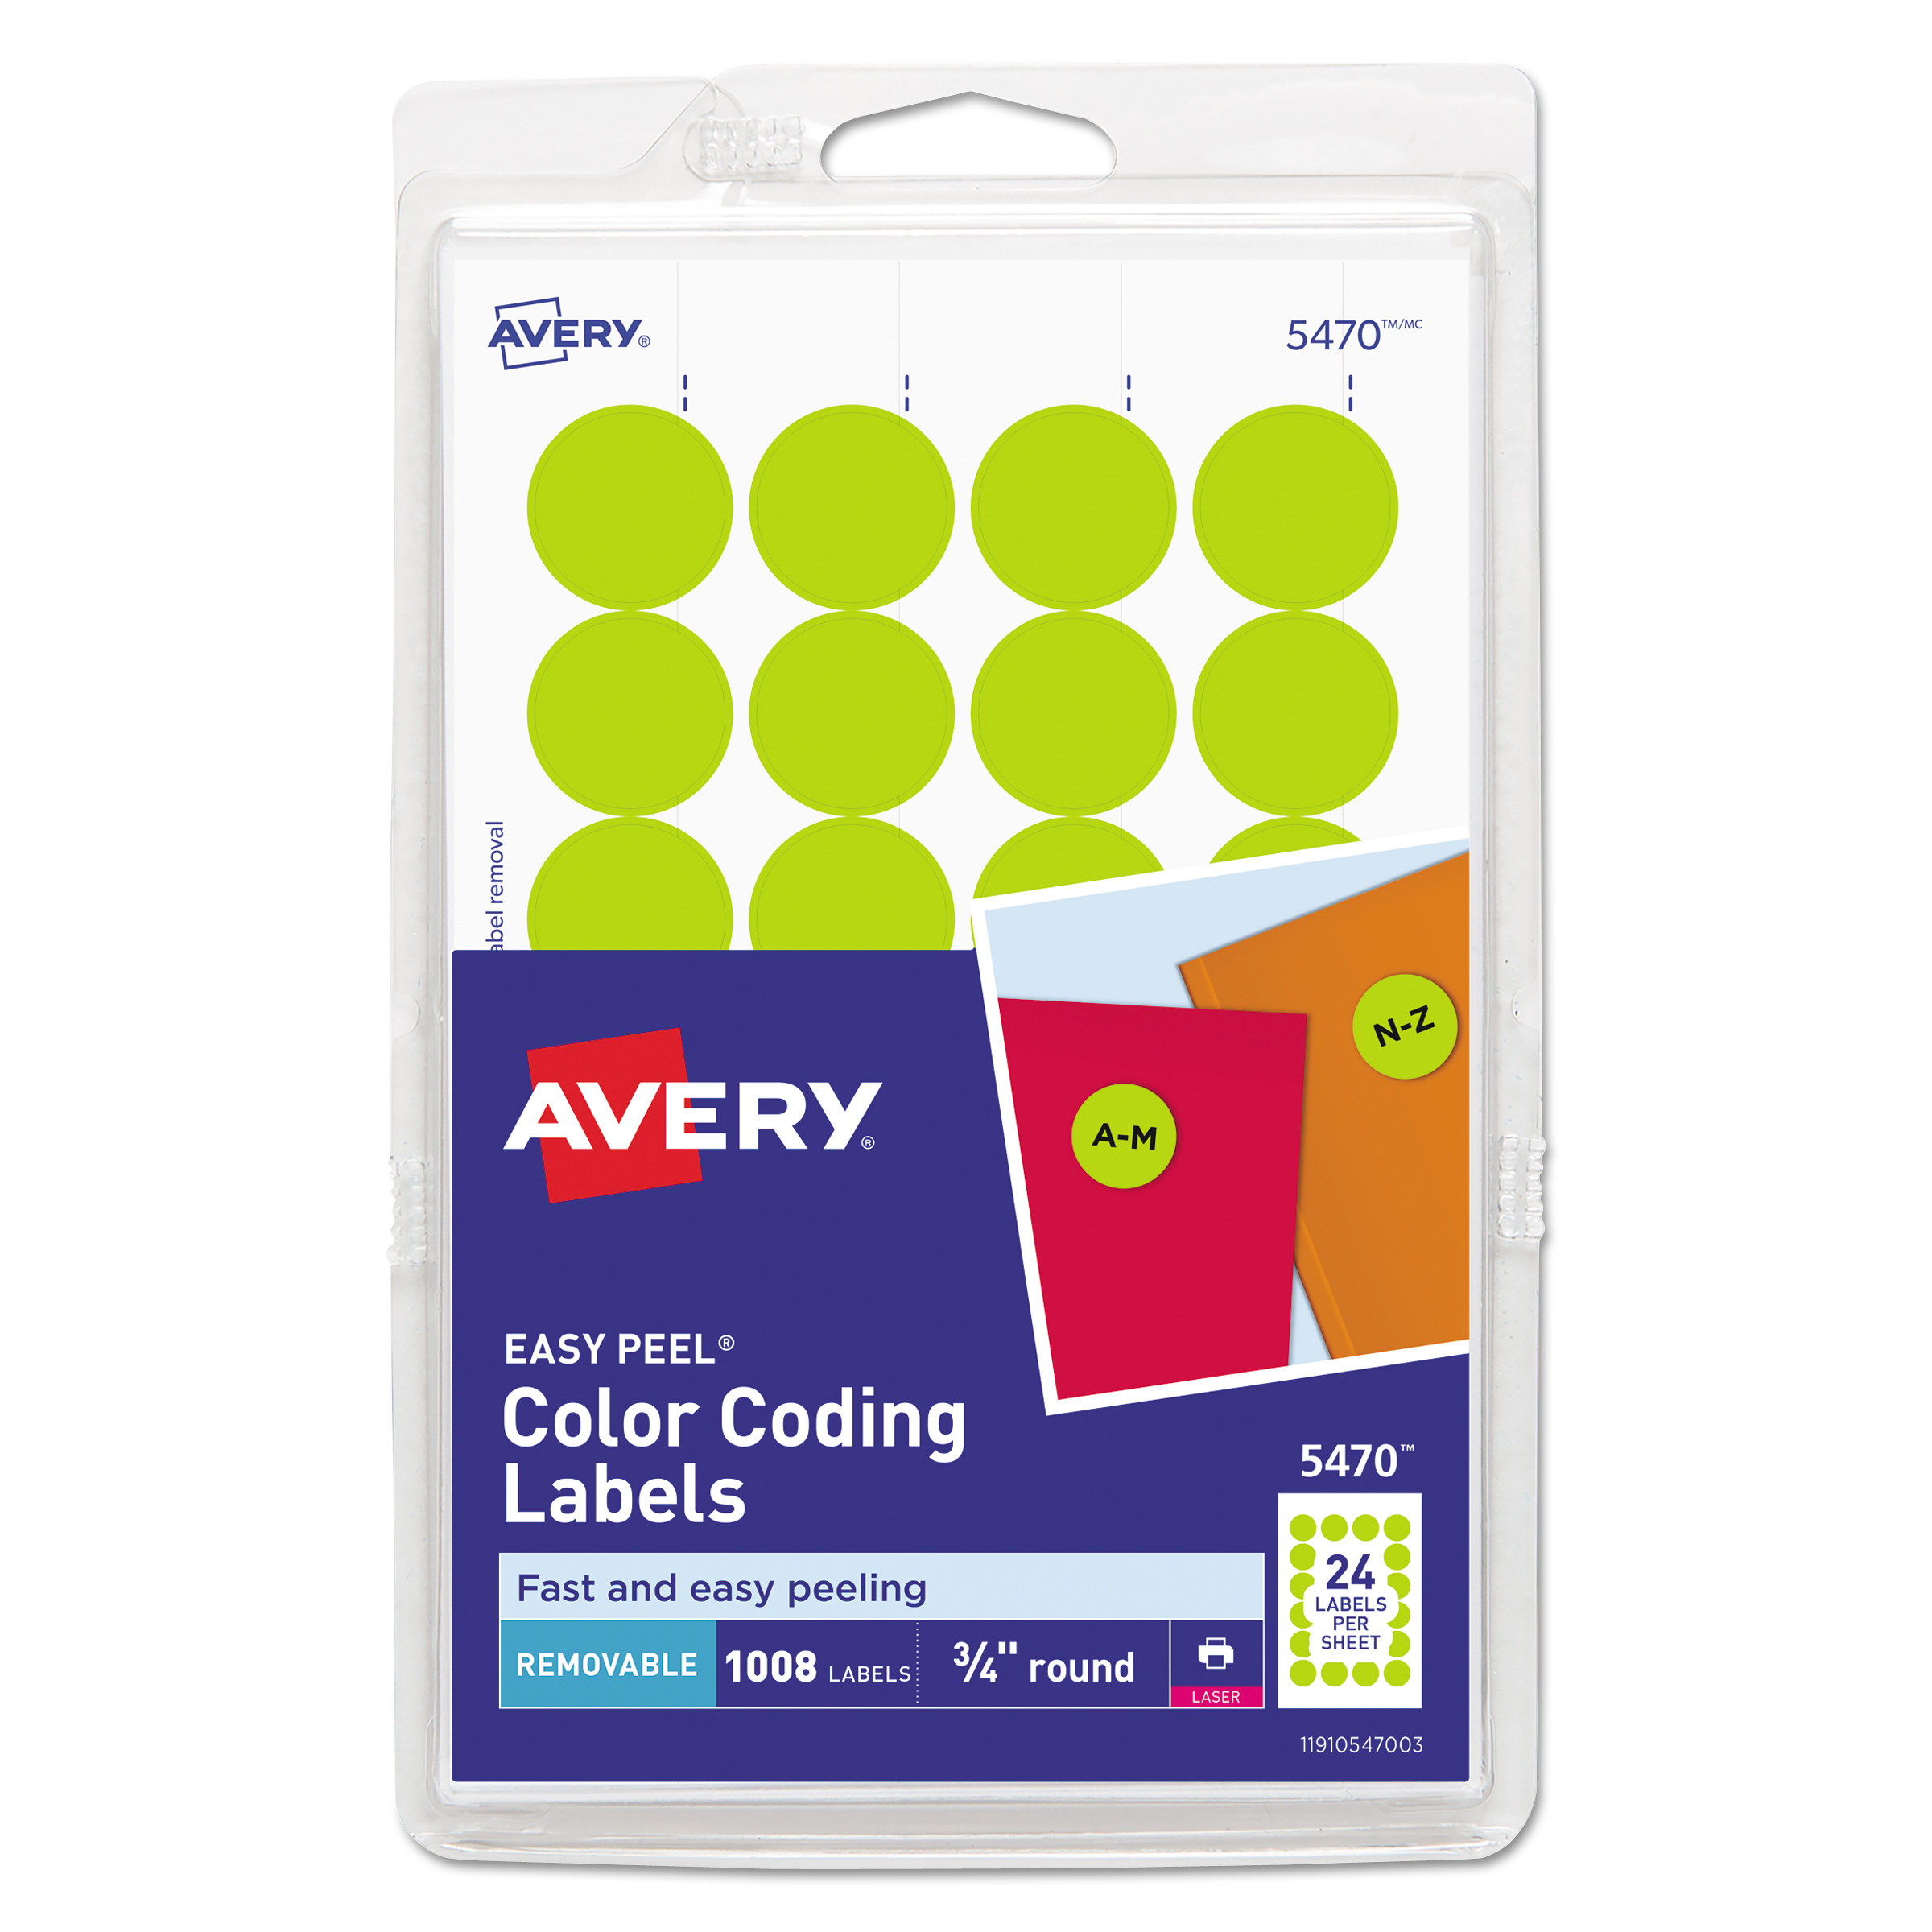  Avery 05470 Printable Self-Adhesive Removable Color-Coding Labels, 0.75 dia., Neon Yellow, 24/Sheet, 42 Sheets/Pack (AVE05470) 